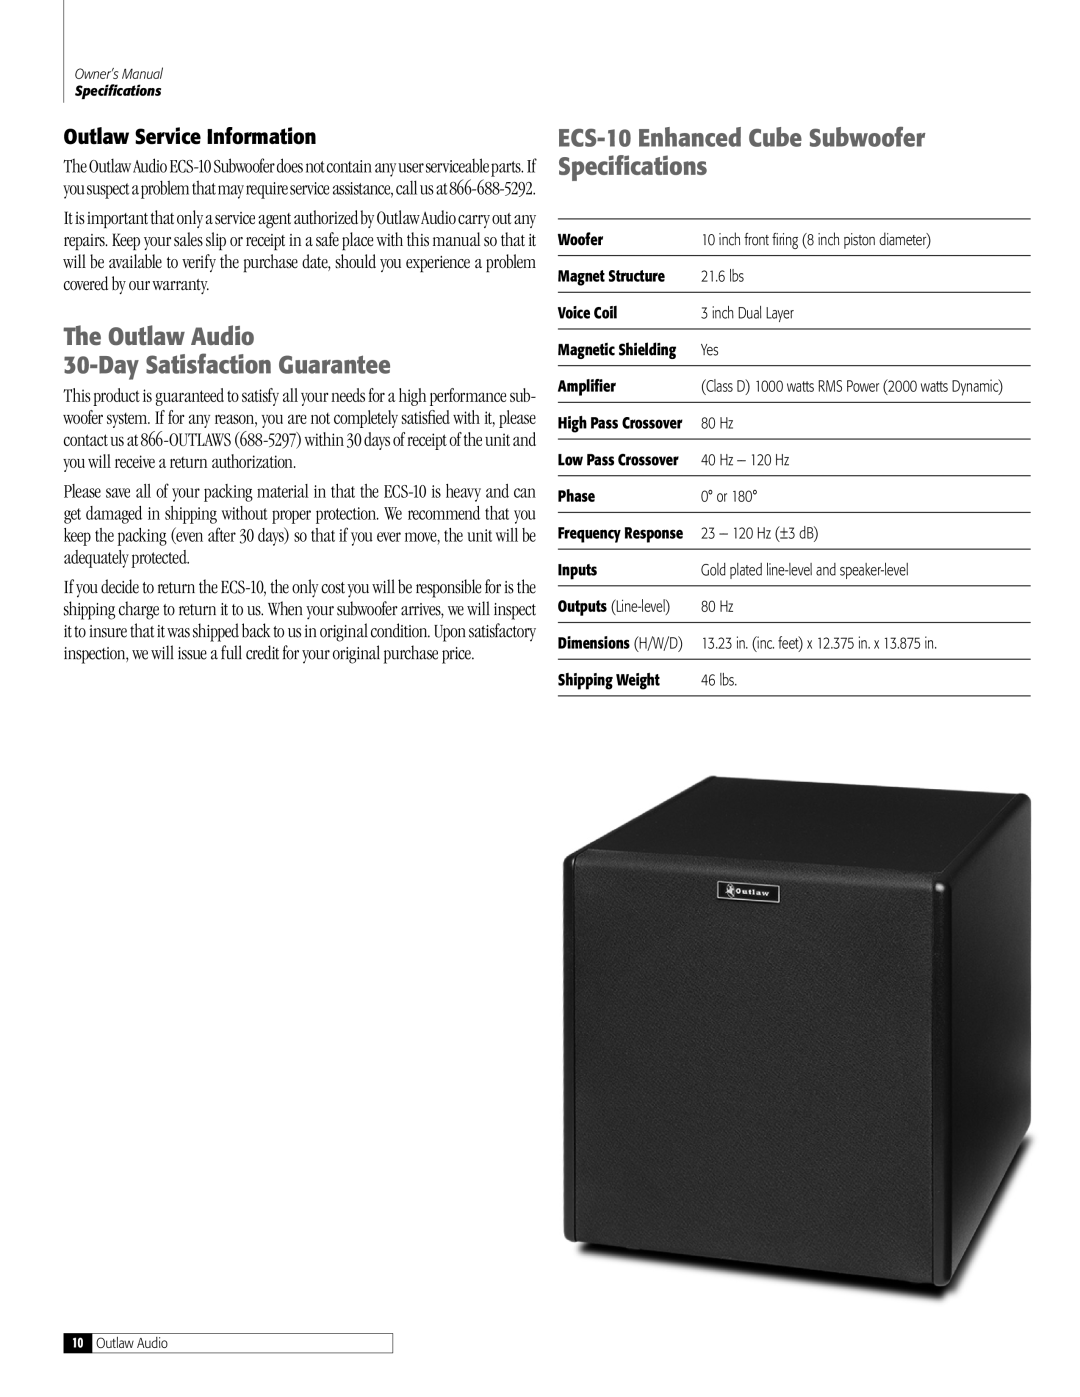 Outlaw Audio owner manual The Outlaw Audio 30-DaySatisfaction Guarantee, ECS-10Enhanced Cube Subwoofer Specifications 